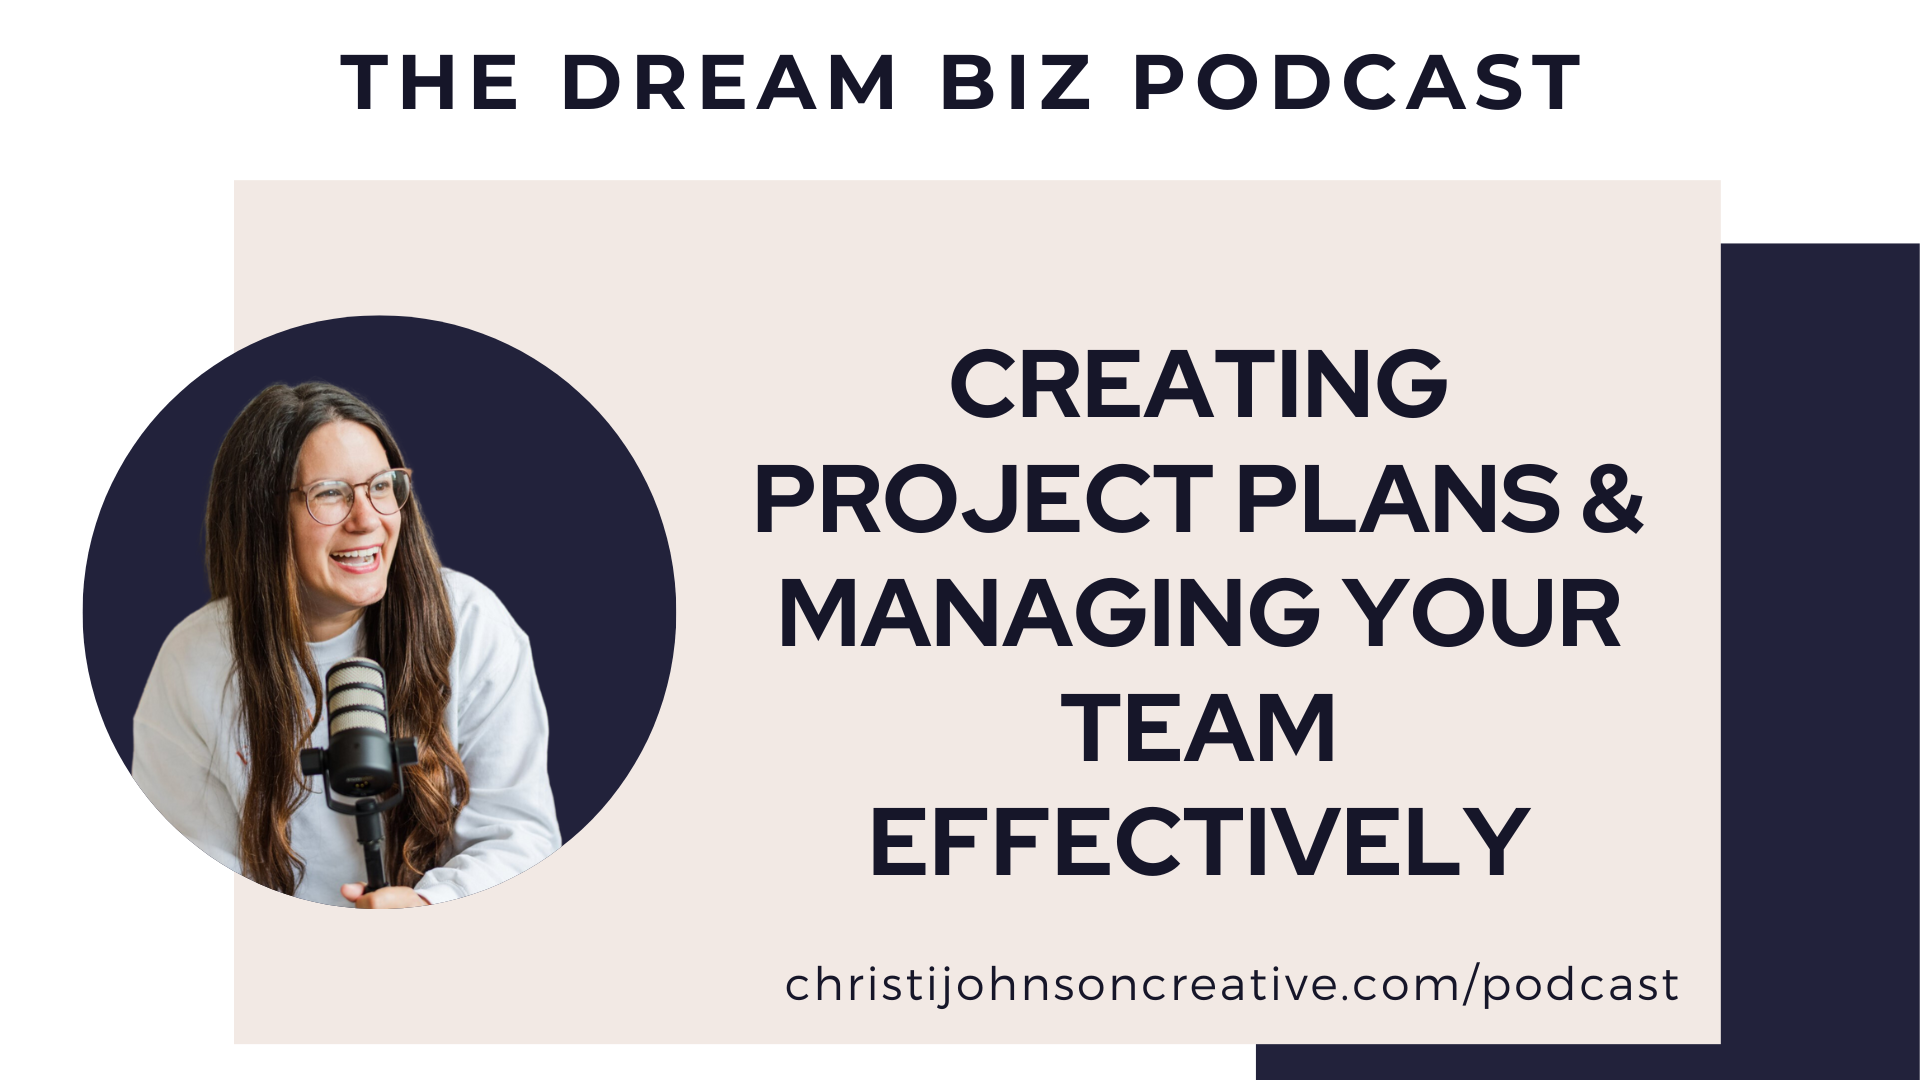 Creating Project Plans and Managing Your Team Effectively is written in purple text on a tan background. There is a photo of Christi smiling to her left holding a podcast microphone.